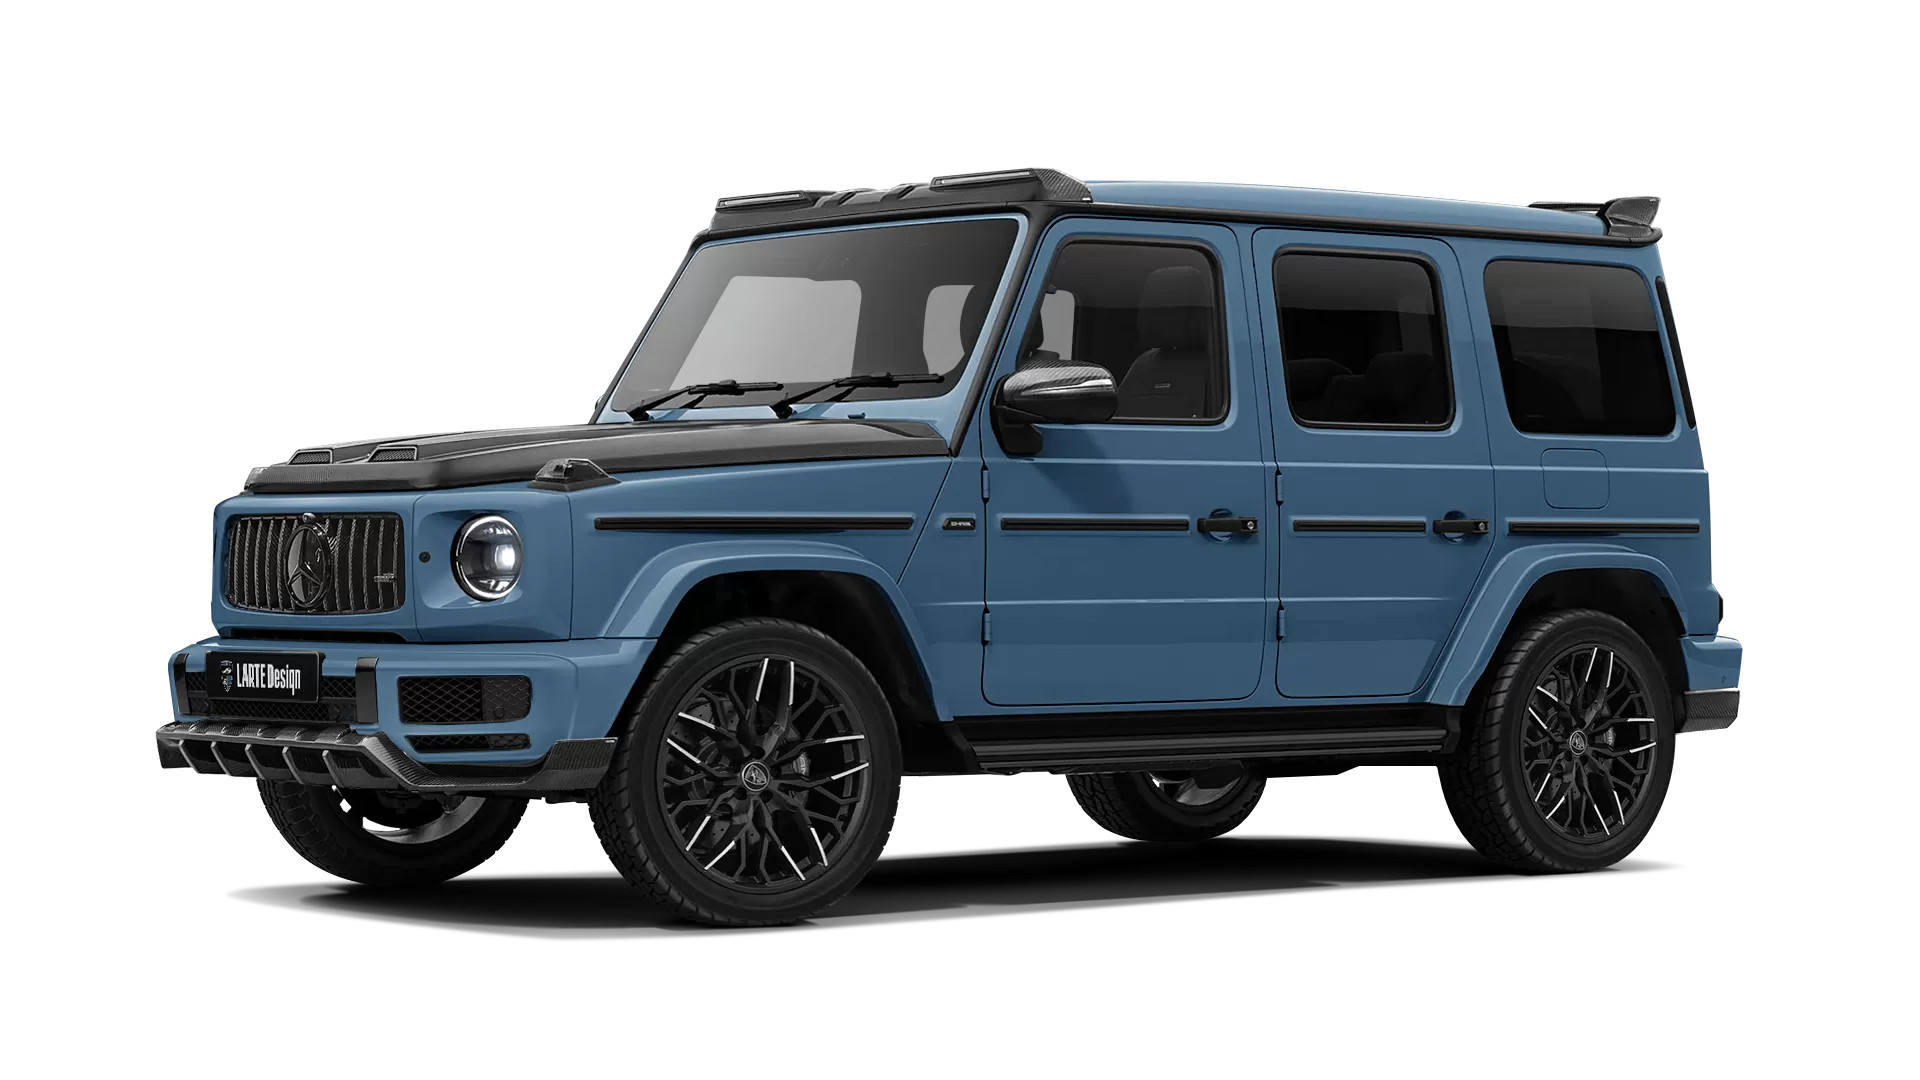 Mercedes G class W463 with carbon body kit: front view shown in Vintage Blue